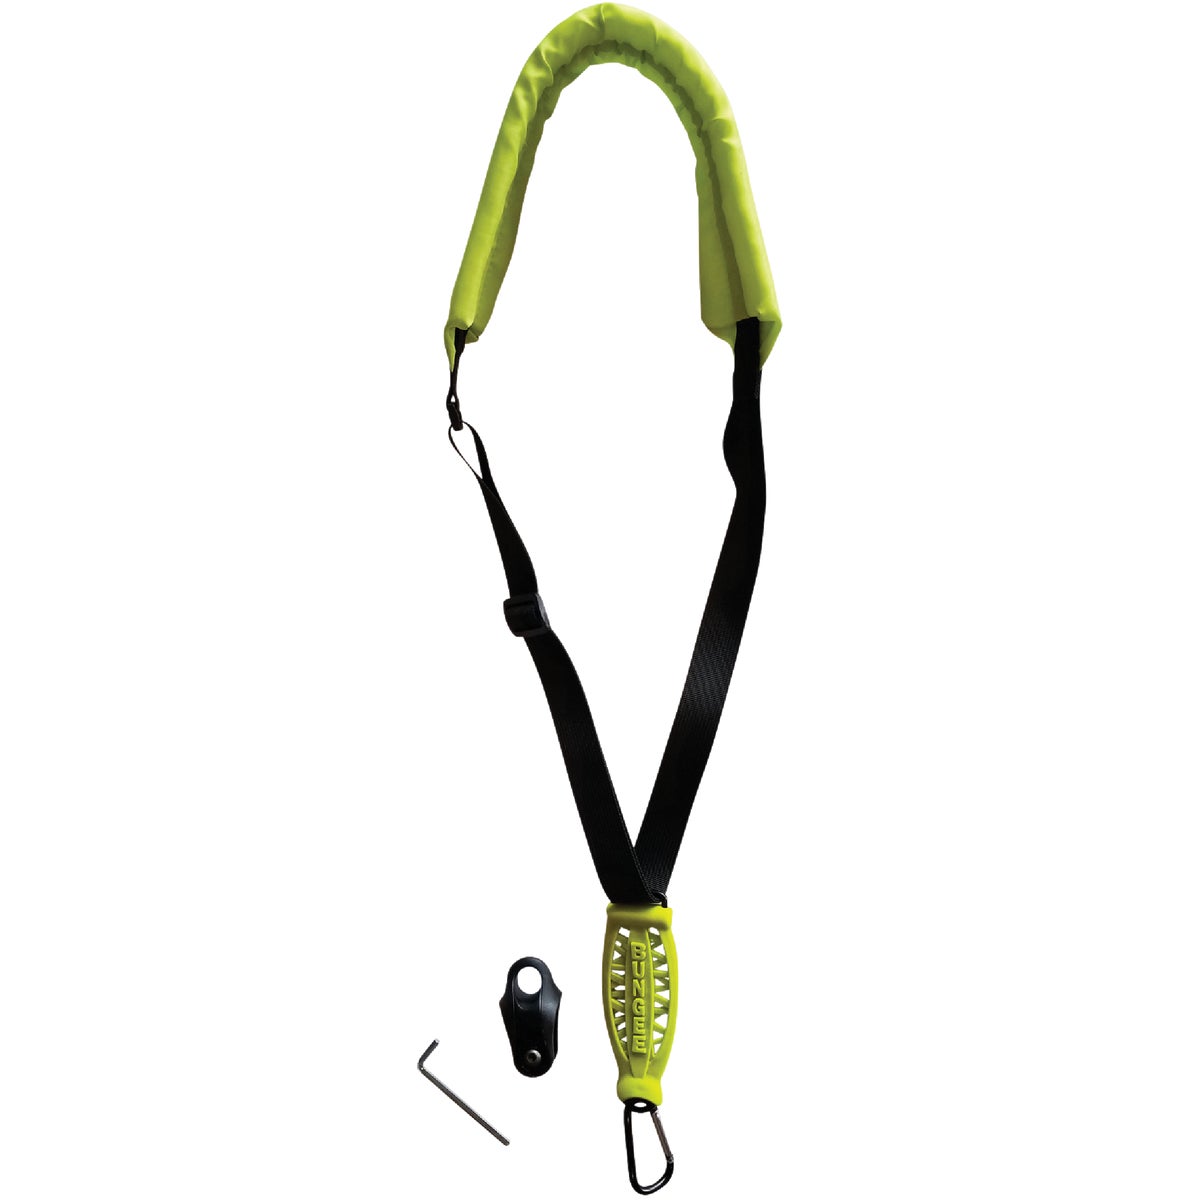 Item 703740, Zero-gravity trimmer strap uses Bungee Pro-X technology to absorb the 